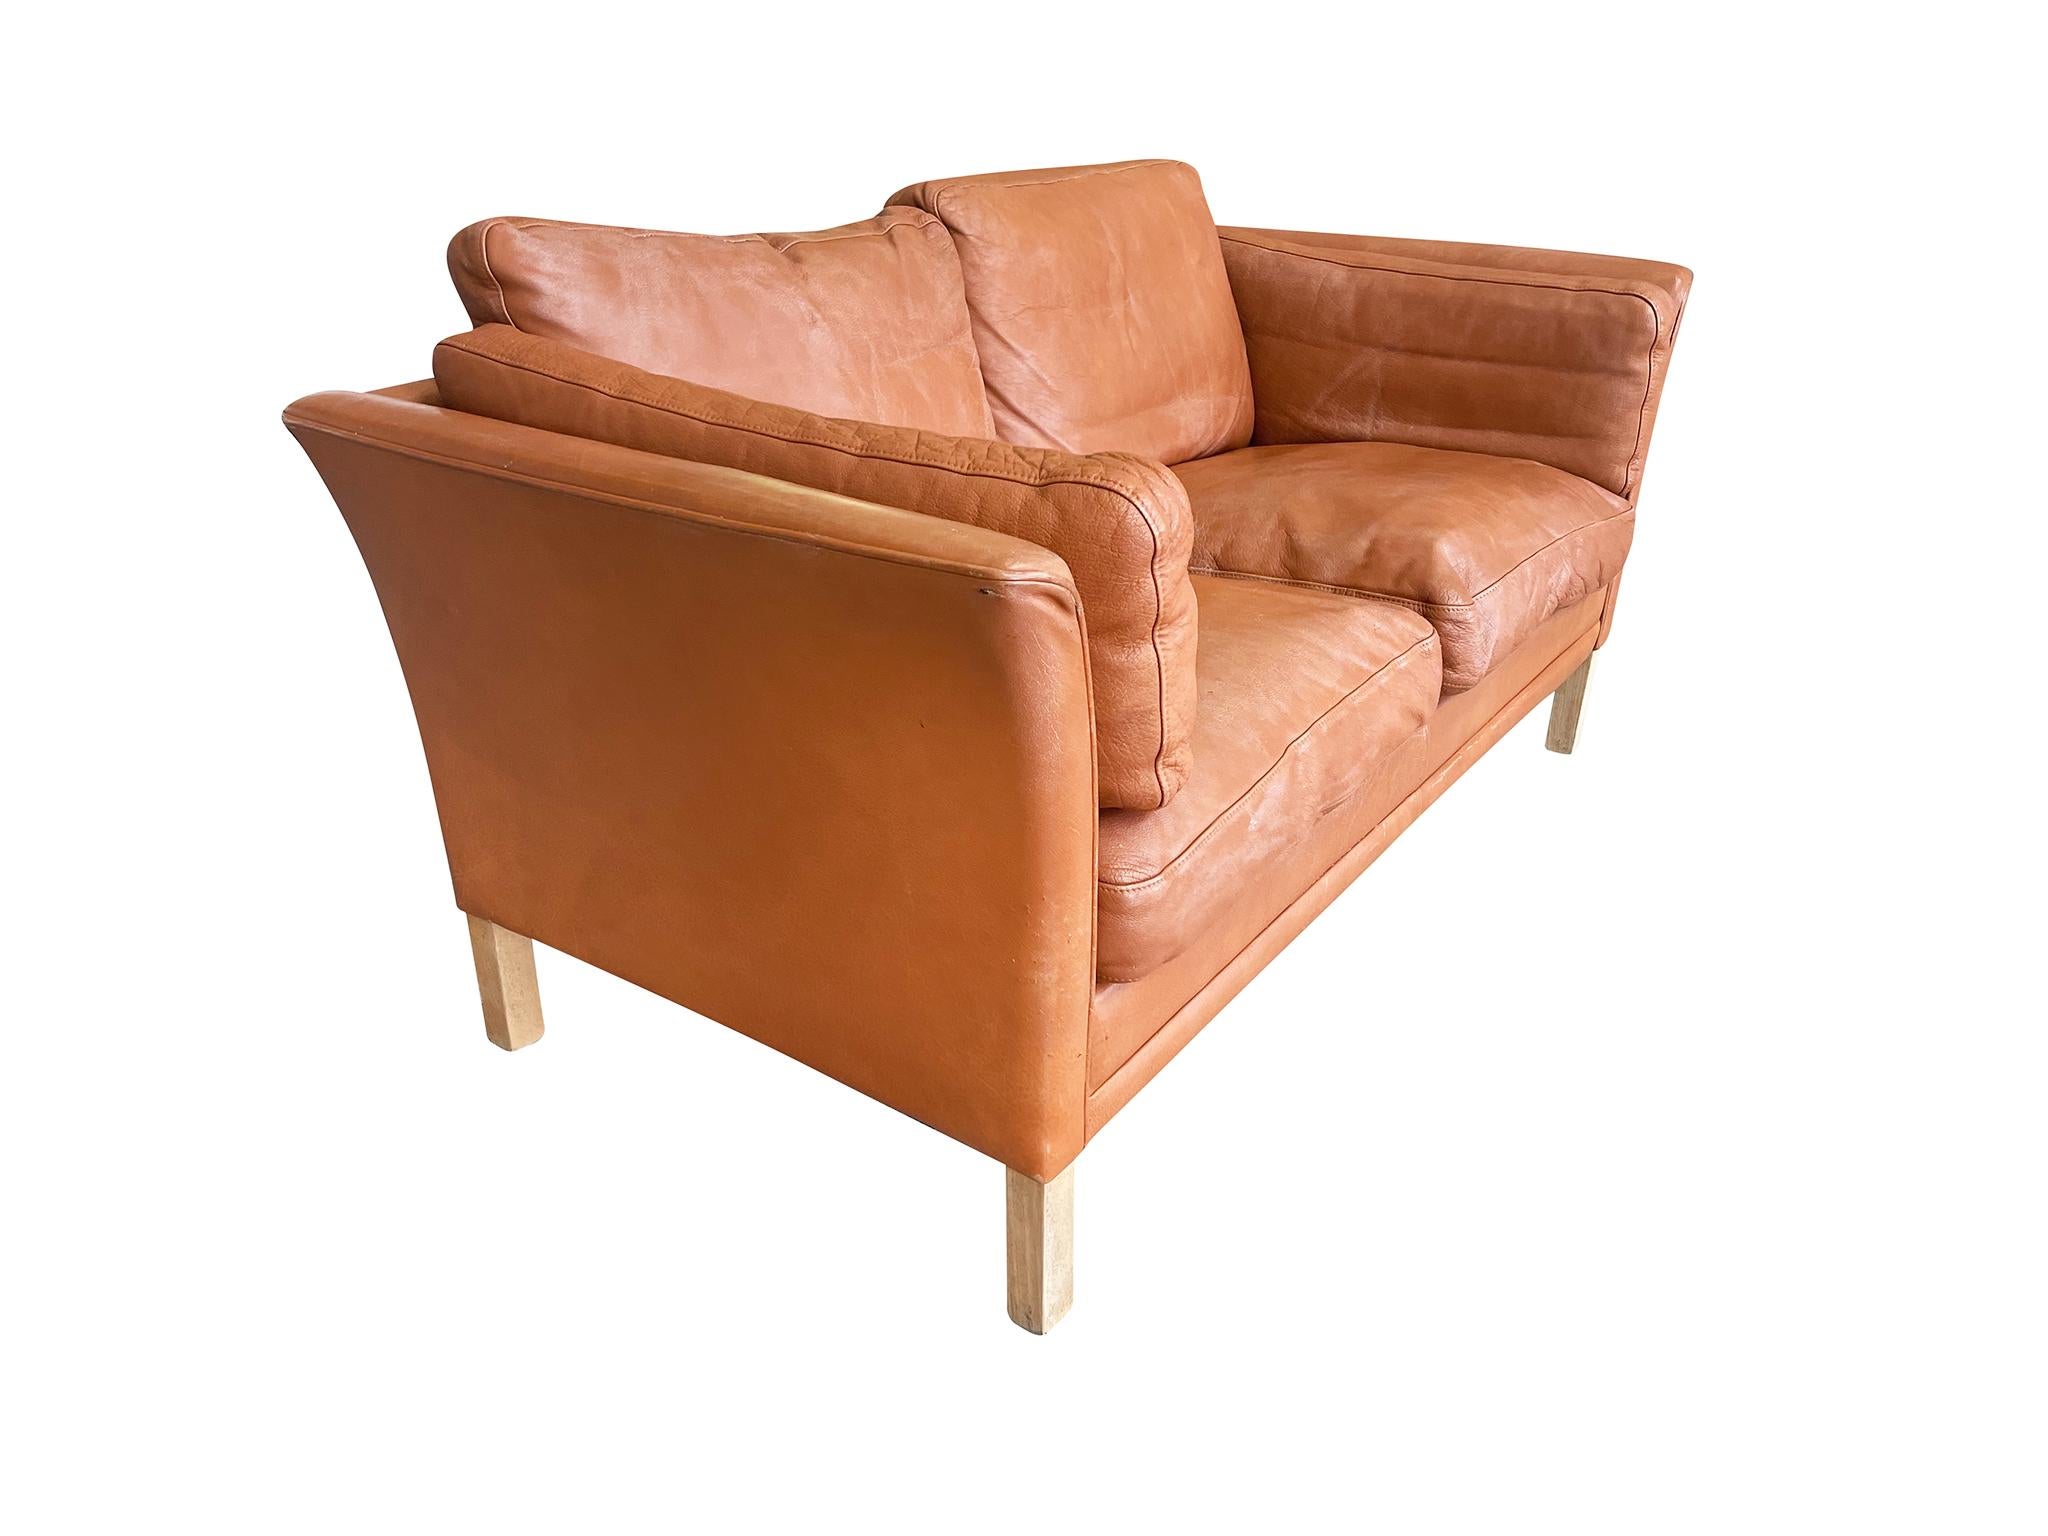 Midcentury Danish Modern settee by Mogens Hansen. The upholstery is a rich cognac leather. There are 6 separate cushions that make up the seating, backrest, and sides. The legs are maple wood.

Additional images are available upon